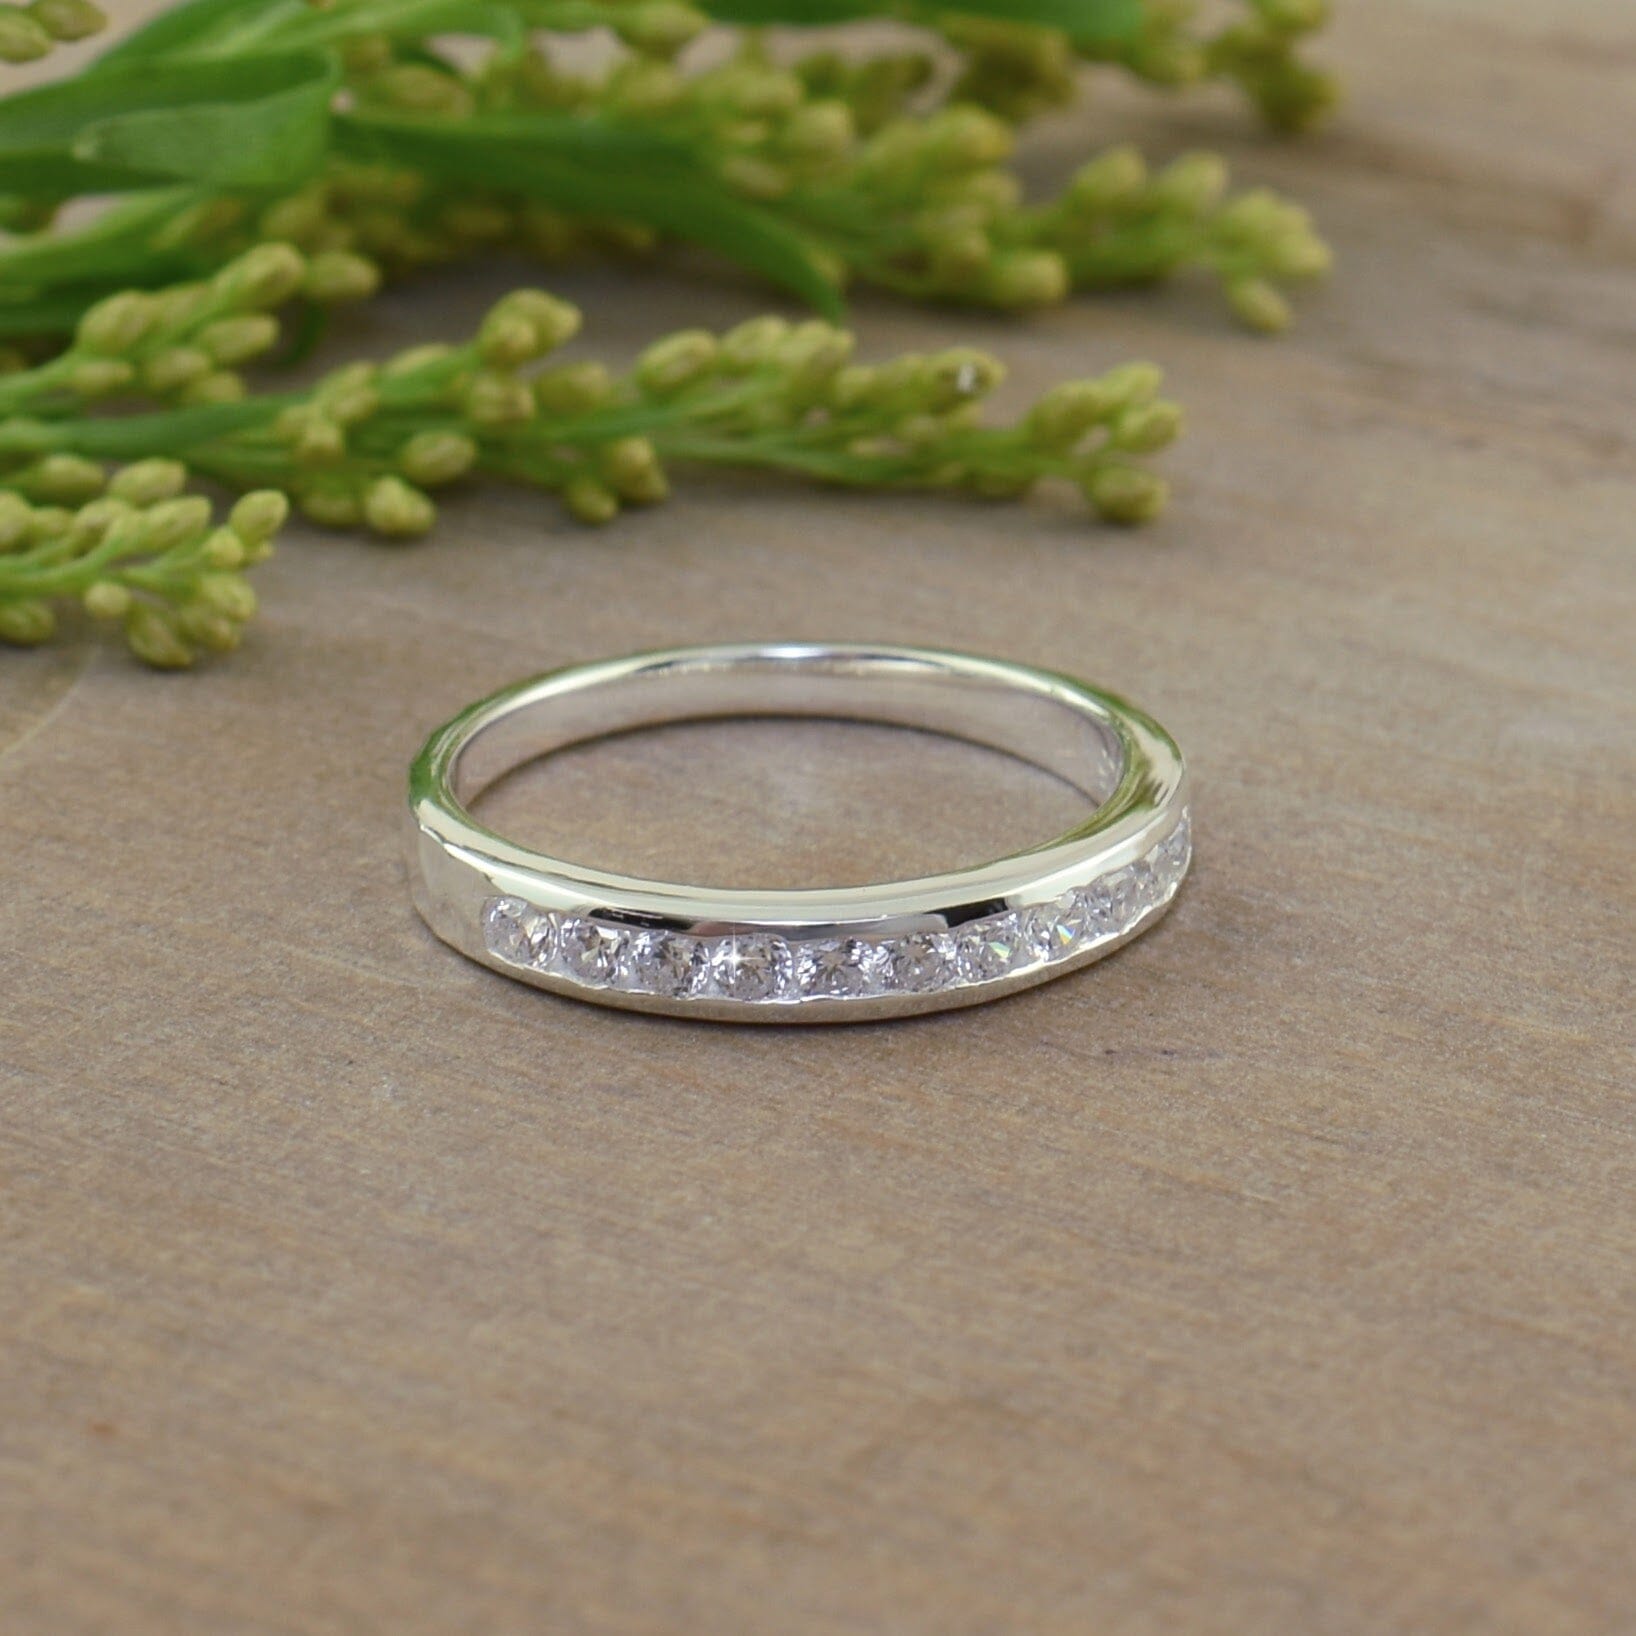 dainty .925 sterling silver band featuring cubic zirconia